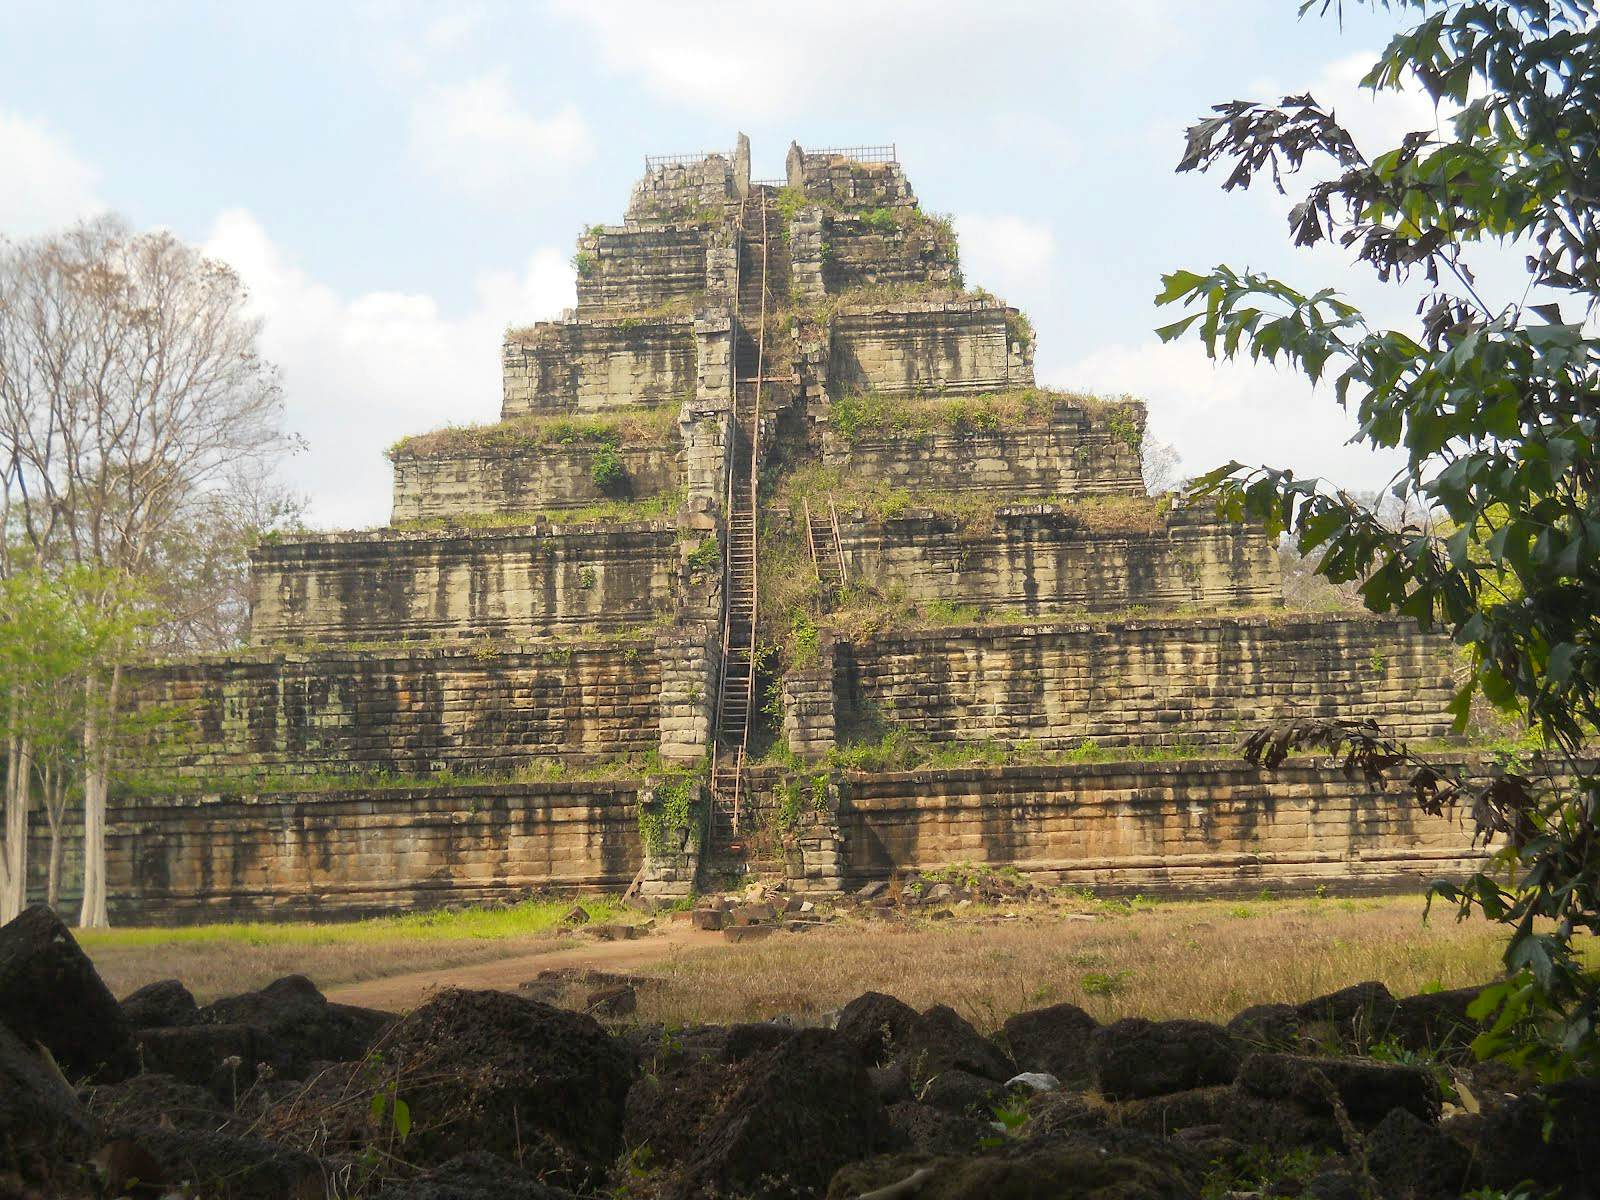 Koh Ker and Beng Mealea Day Tour